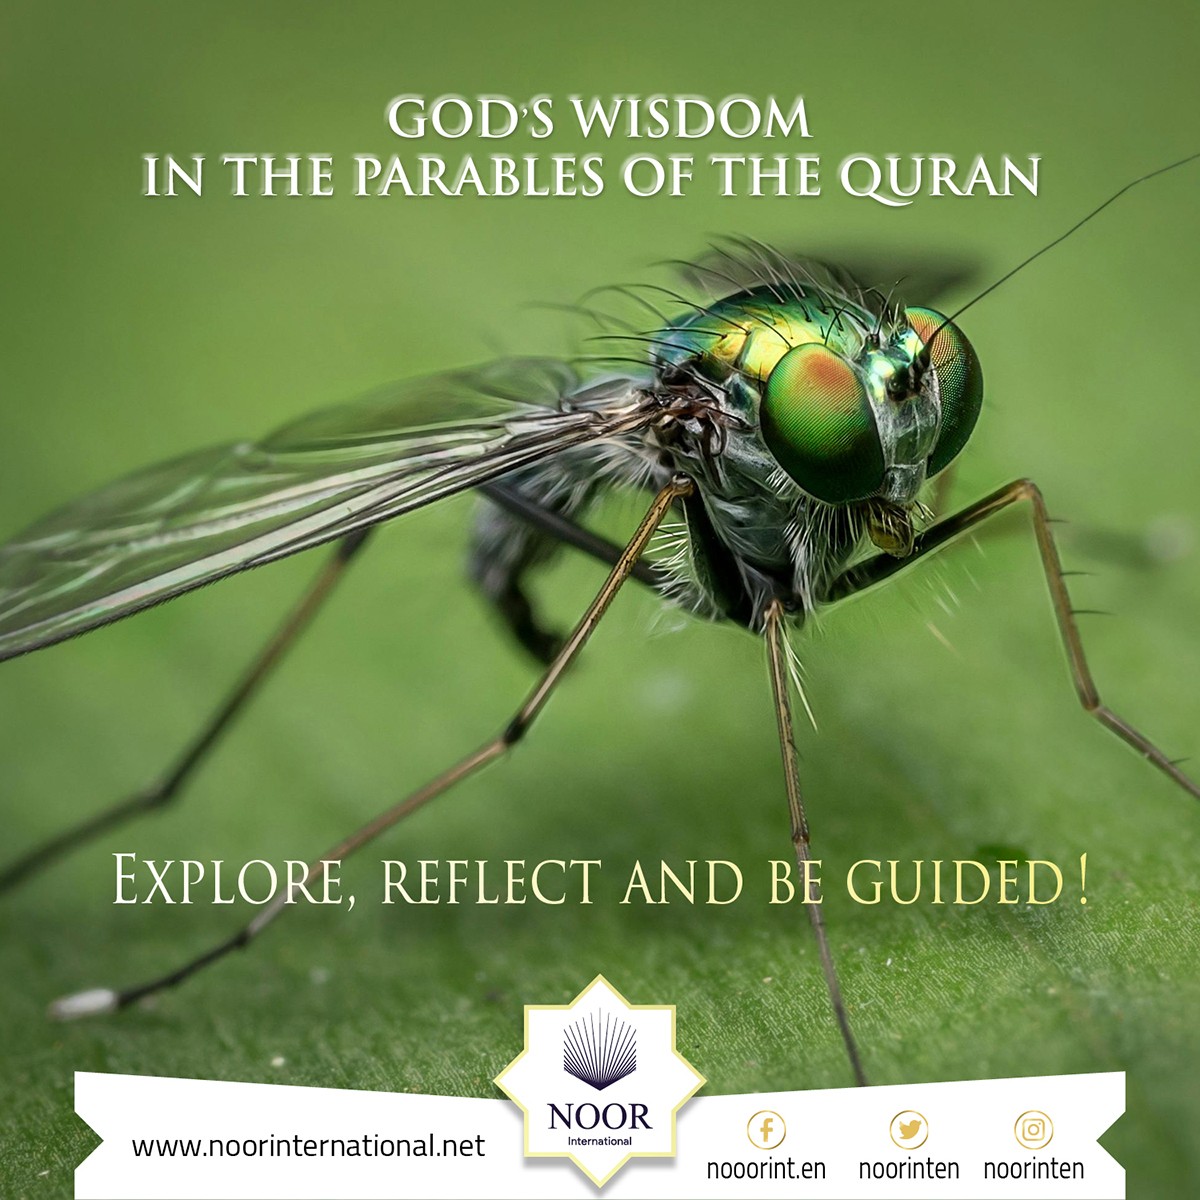 Parables in the Quran